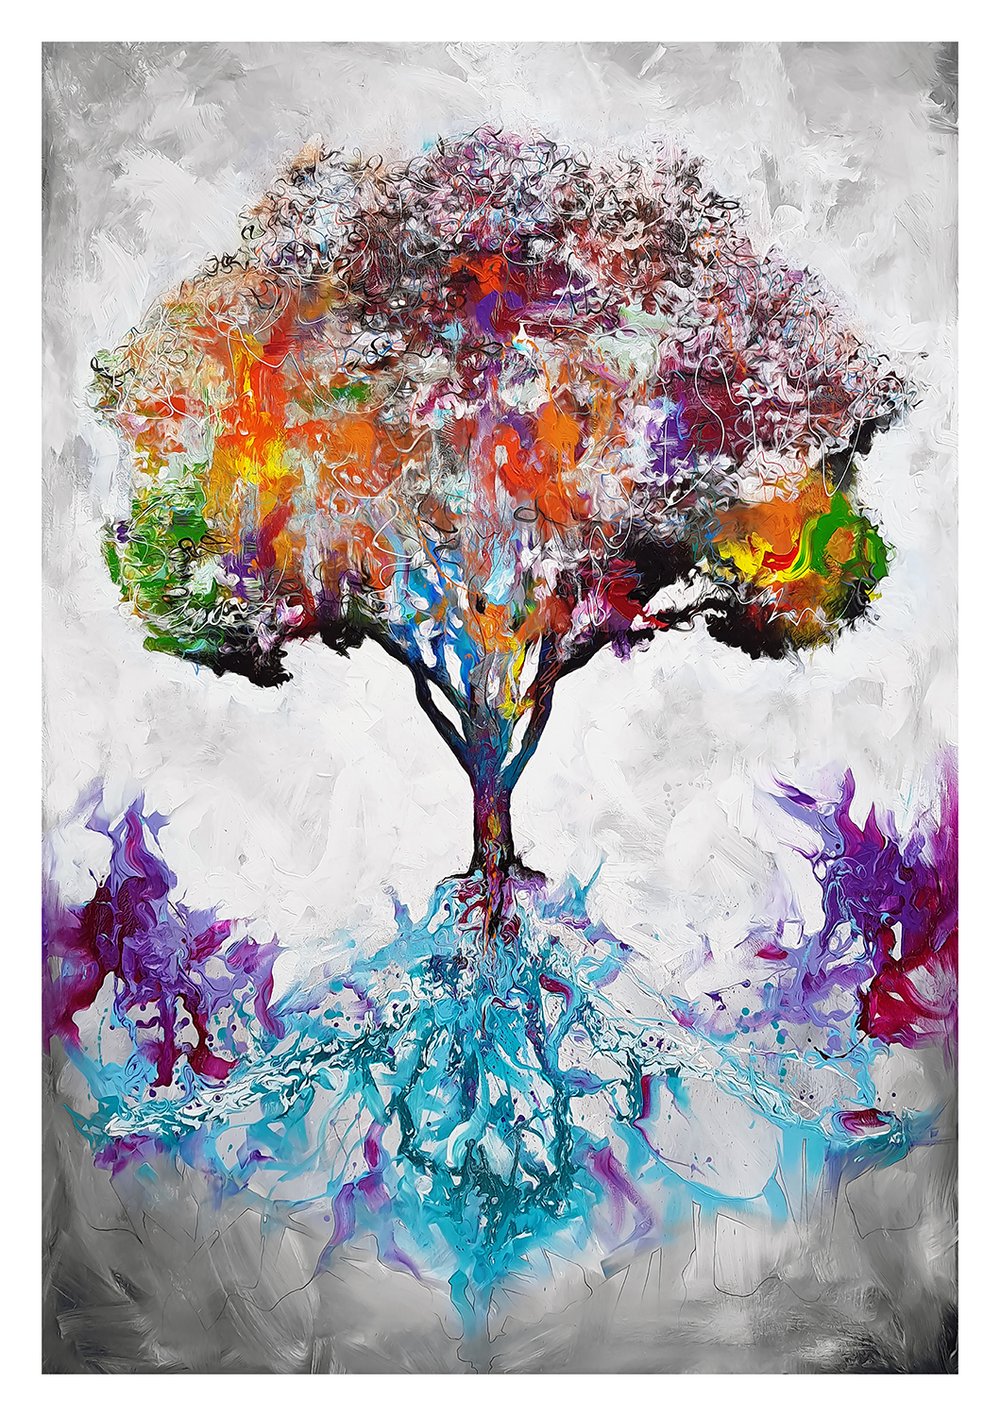 Nourished From The Roots - Signed Open Edition Print - FREE WORLDWIDE SHIPPING!!!